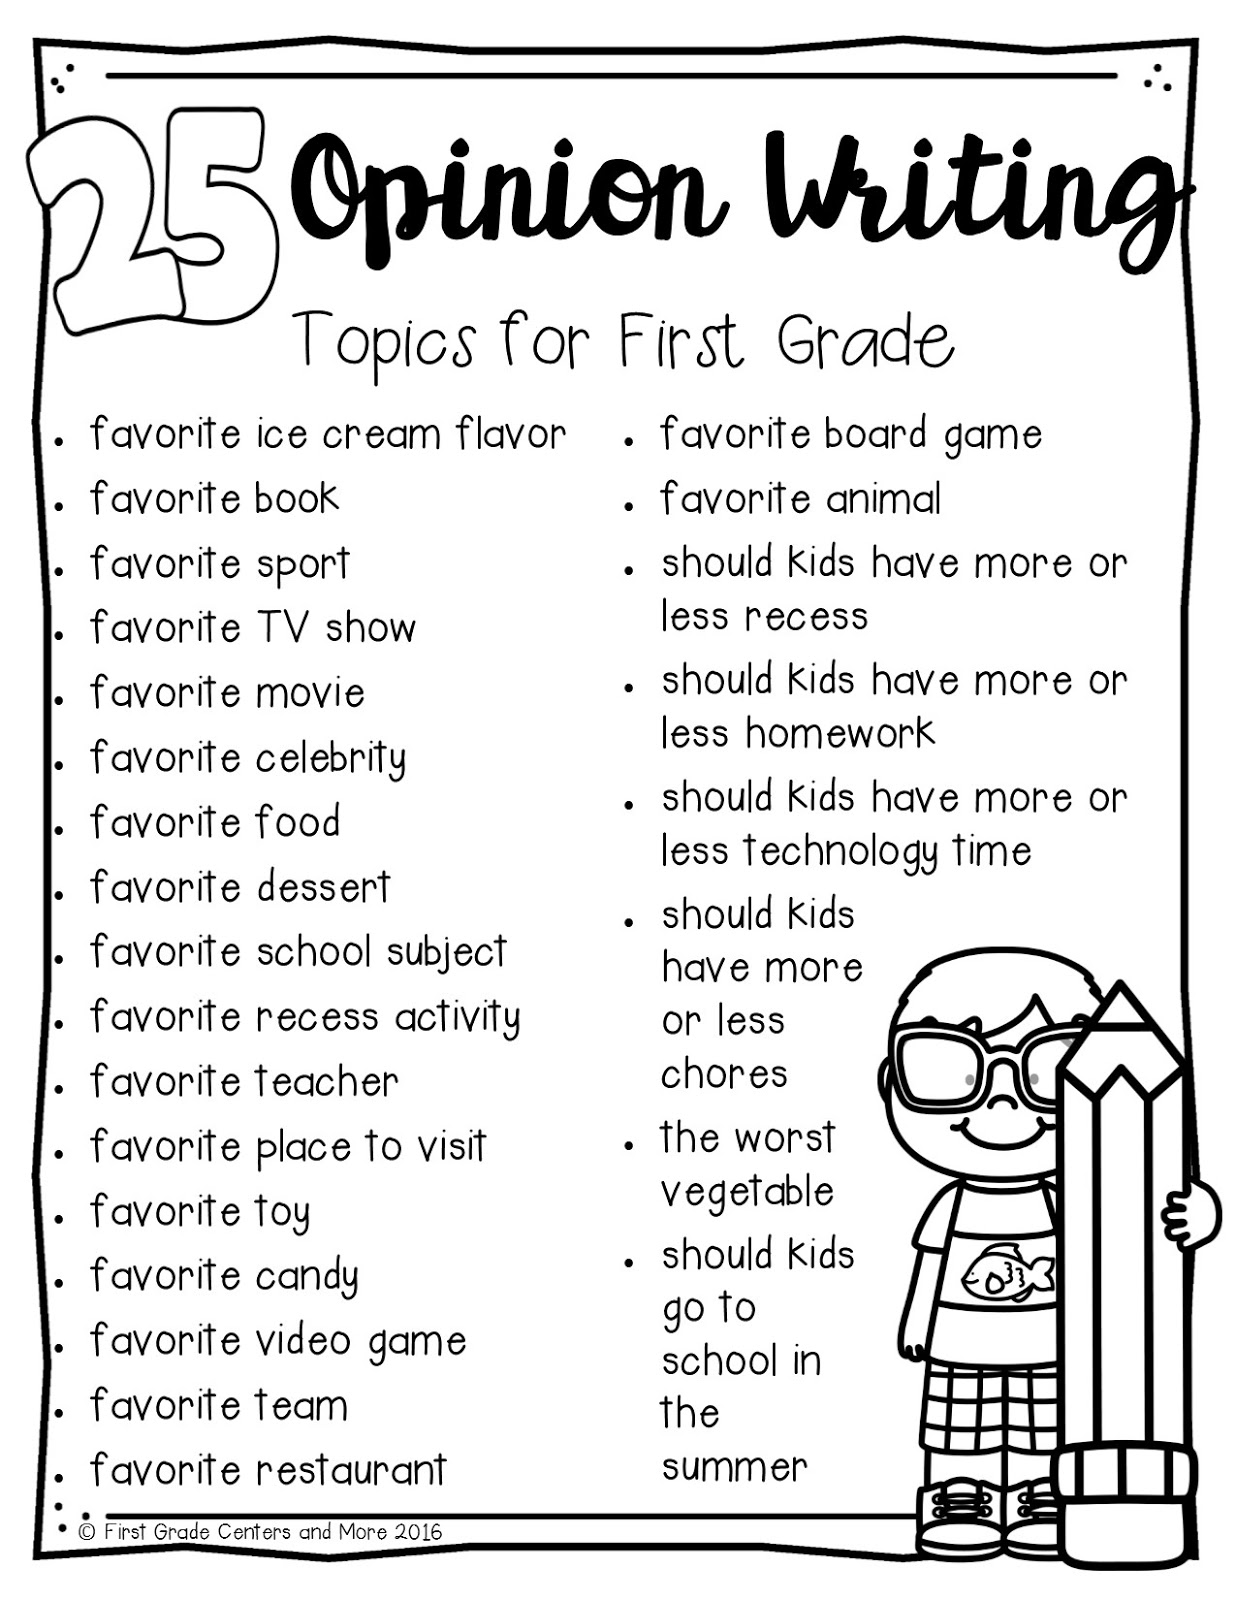 Report writing topics for kids